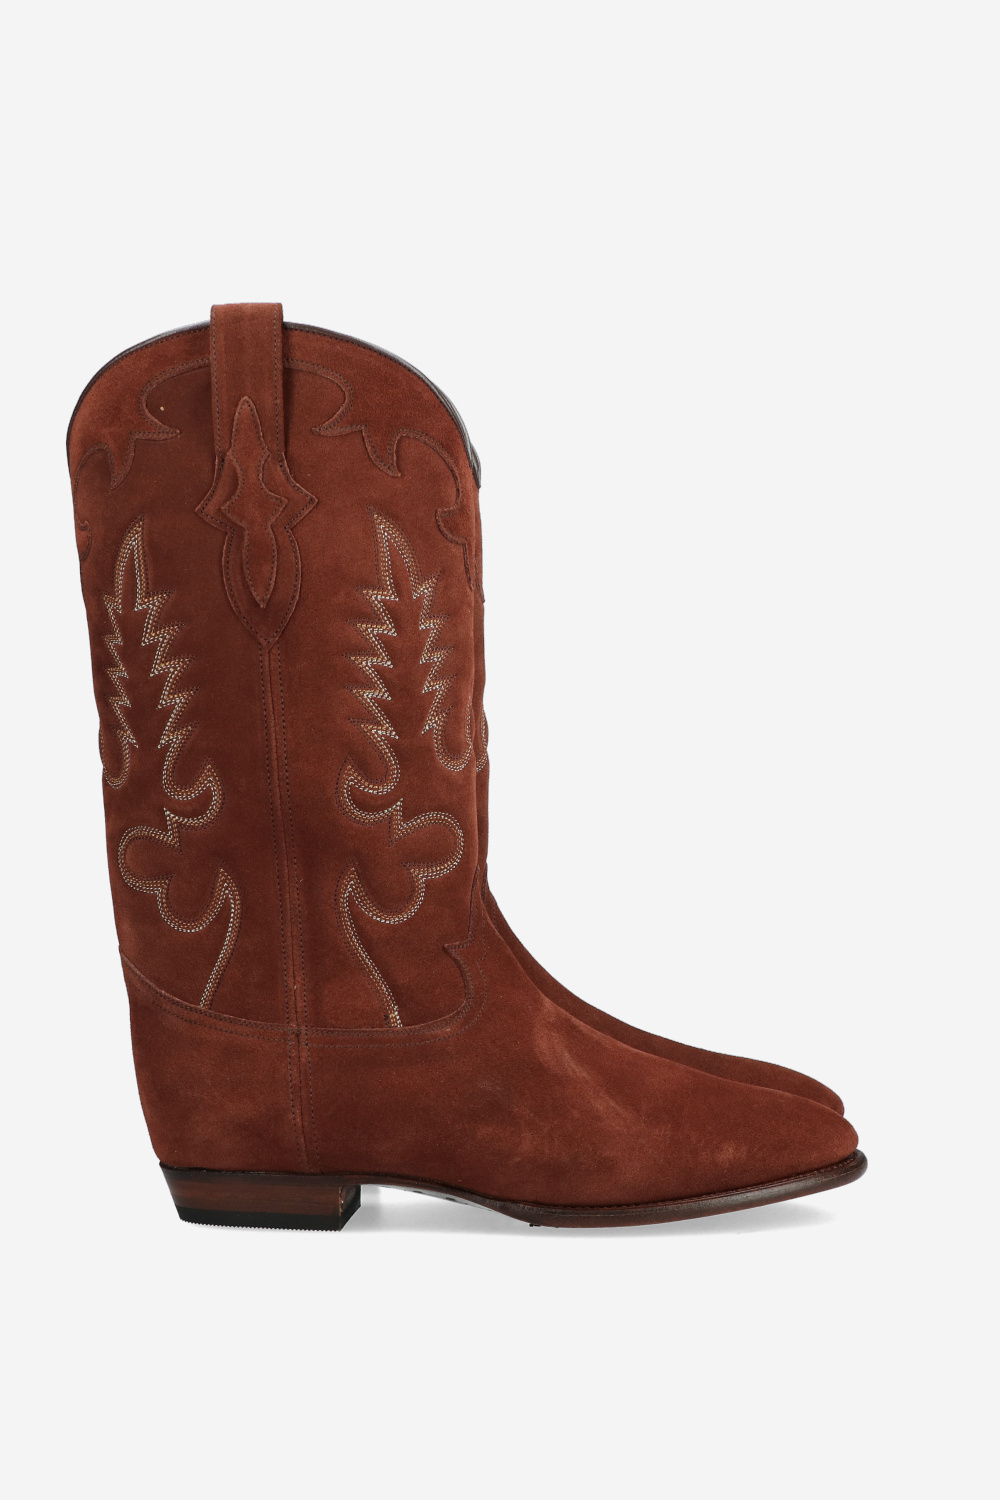 Shiloh Heritage Boots Brown